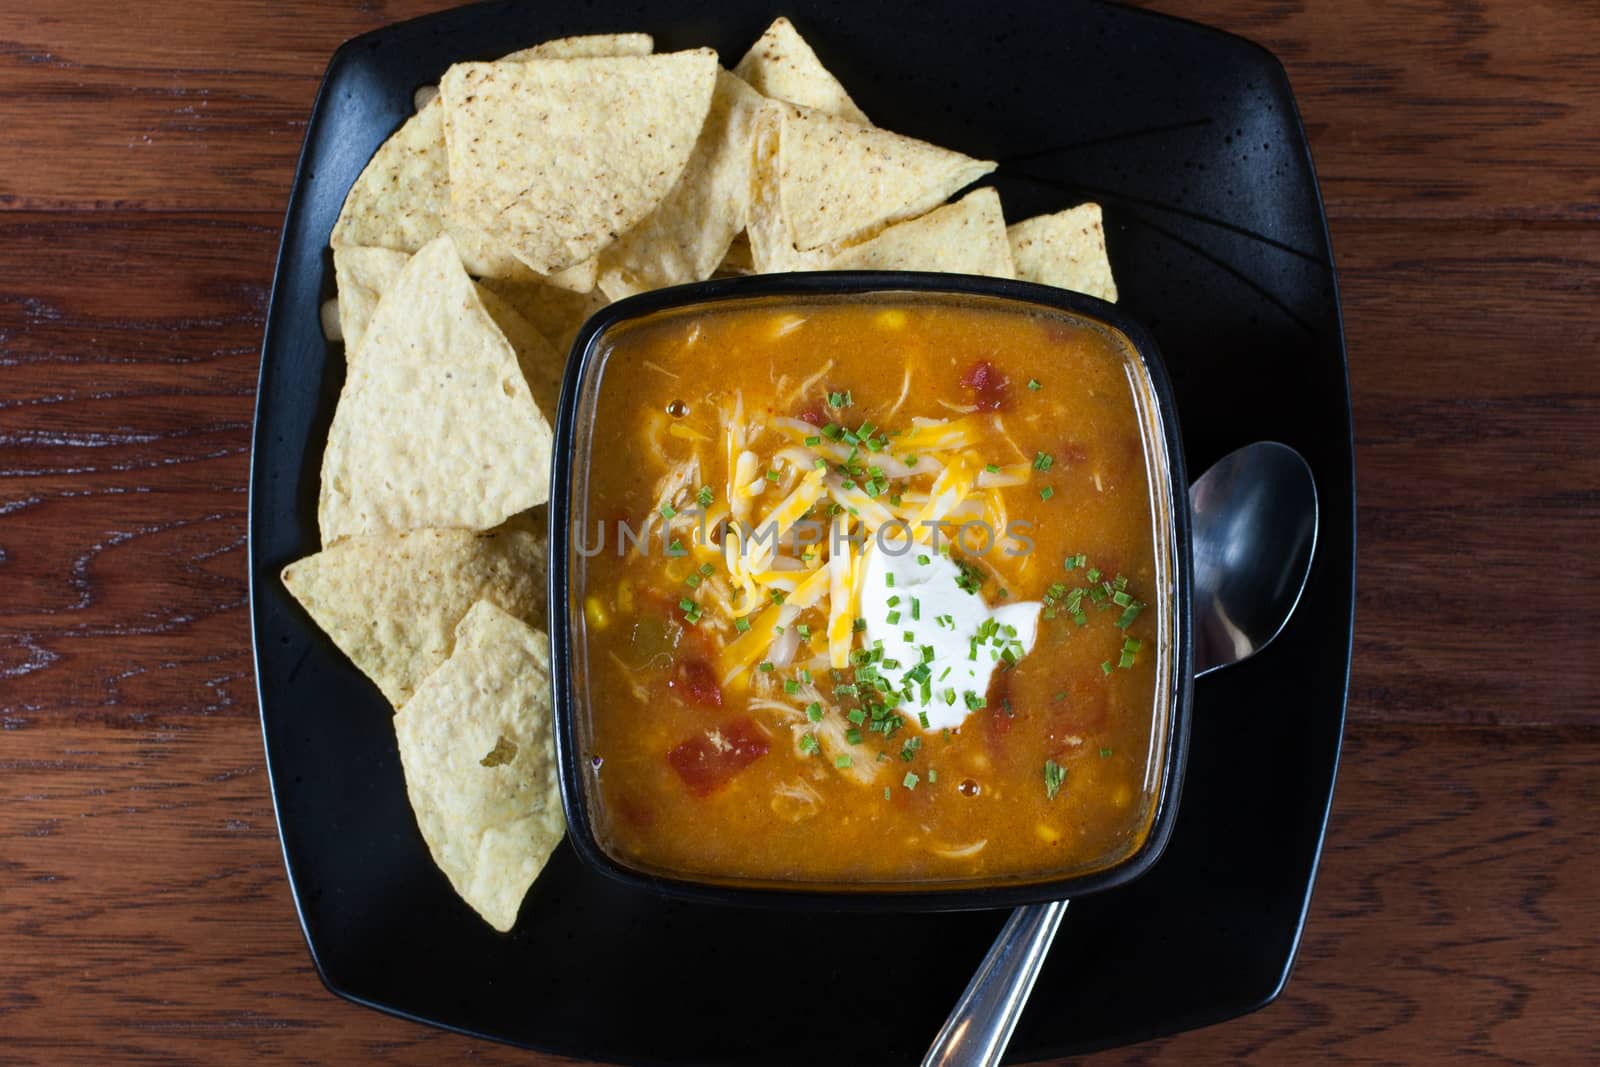 A bowl of chicken enchilada soup with white corn tortillas on the side.